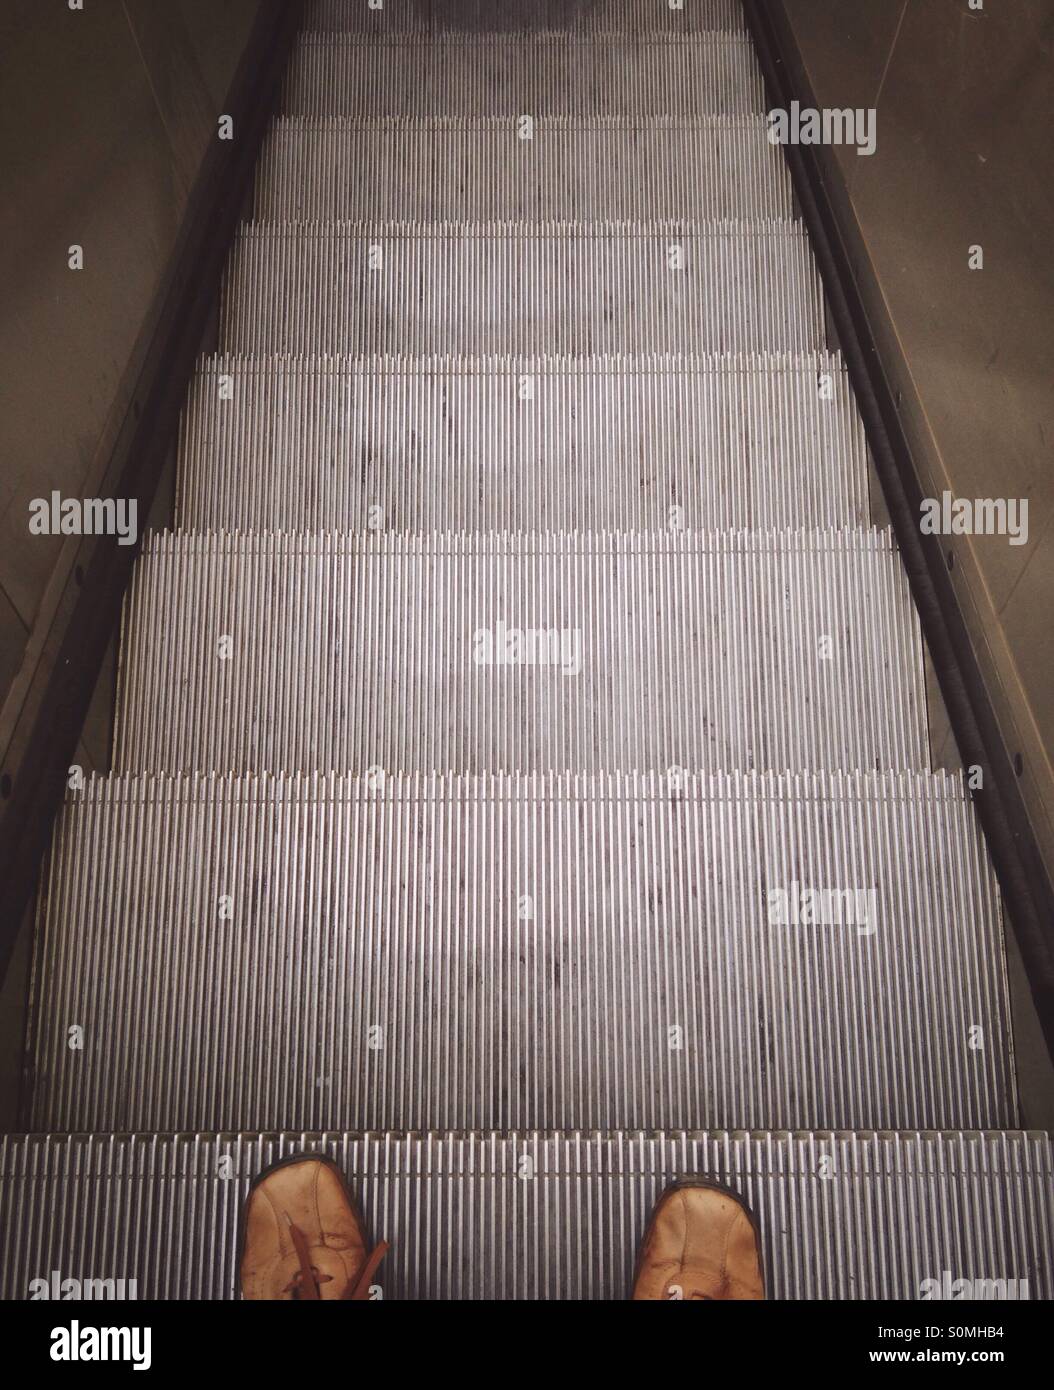 Feet on escalator from point of view Stock Photo - Alamy